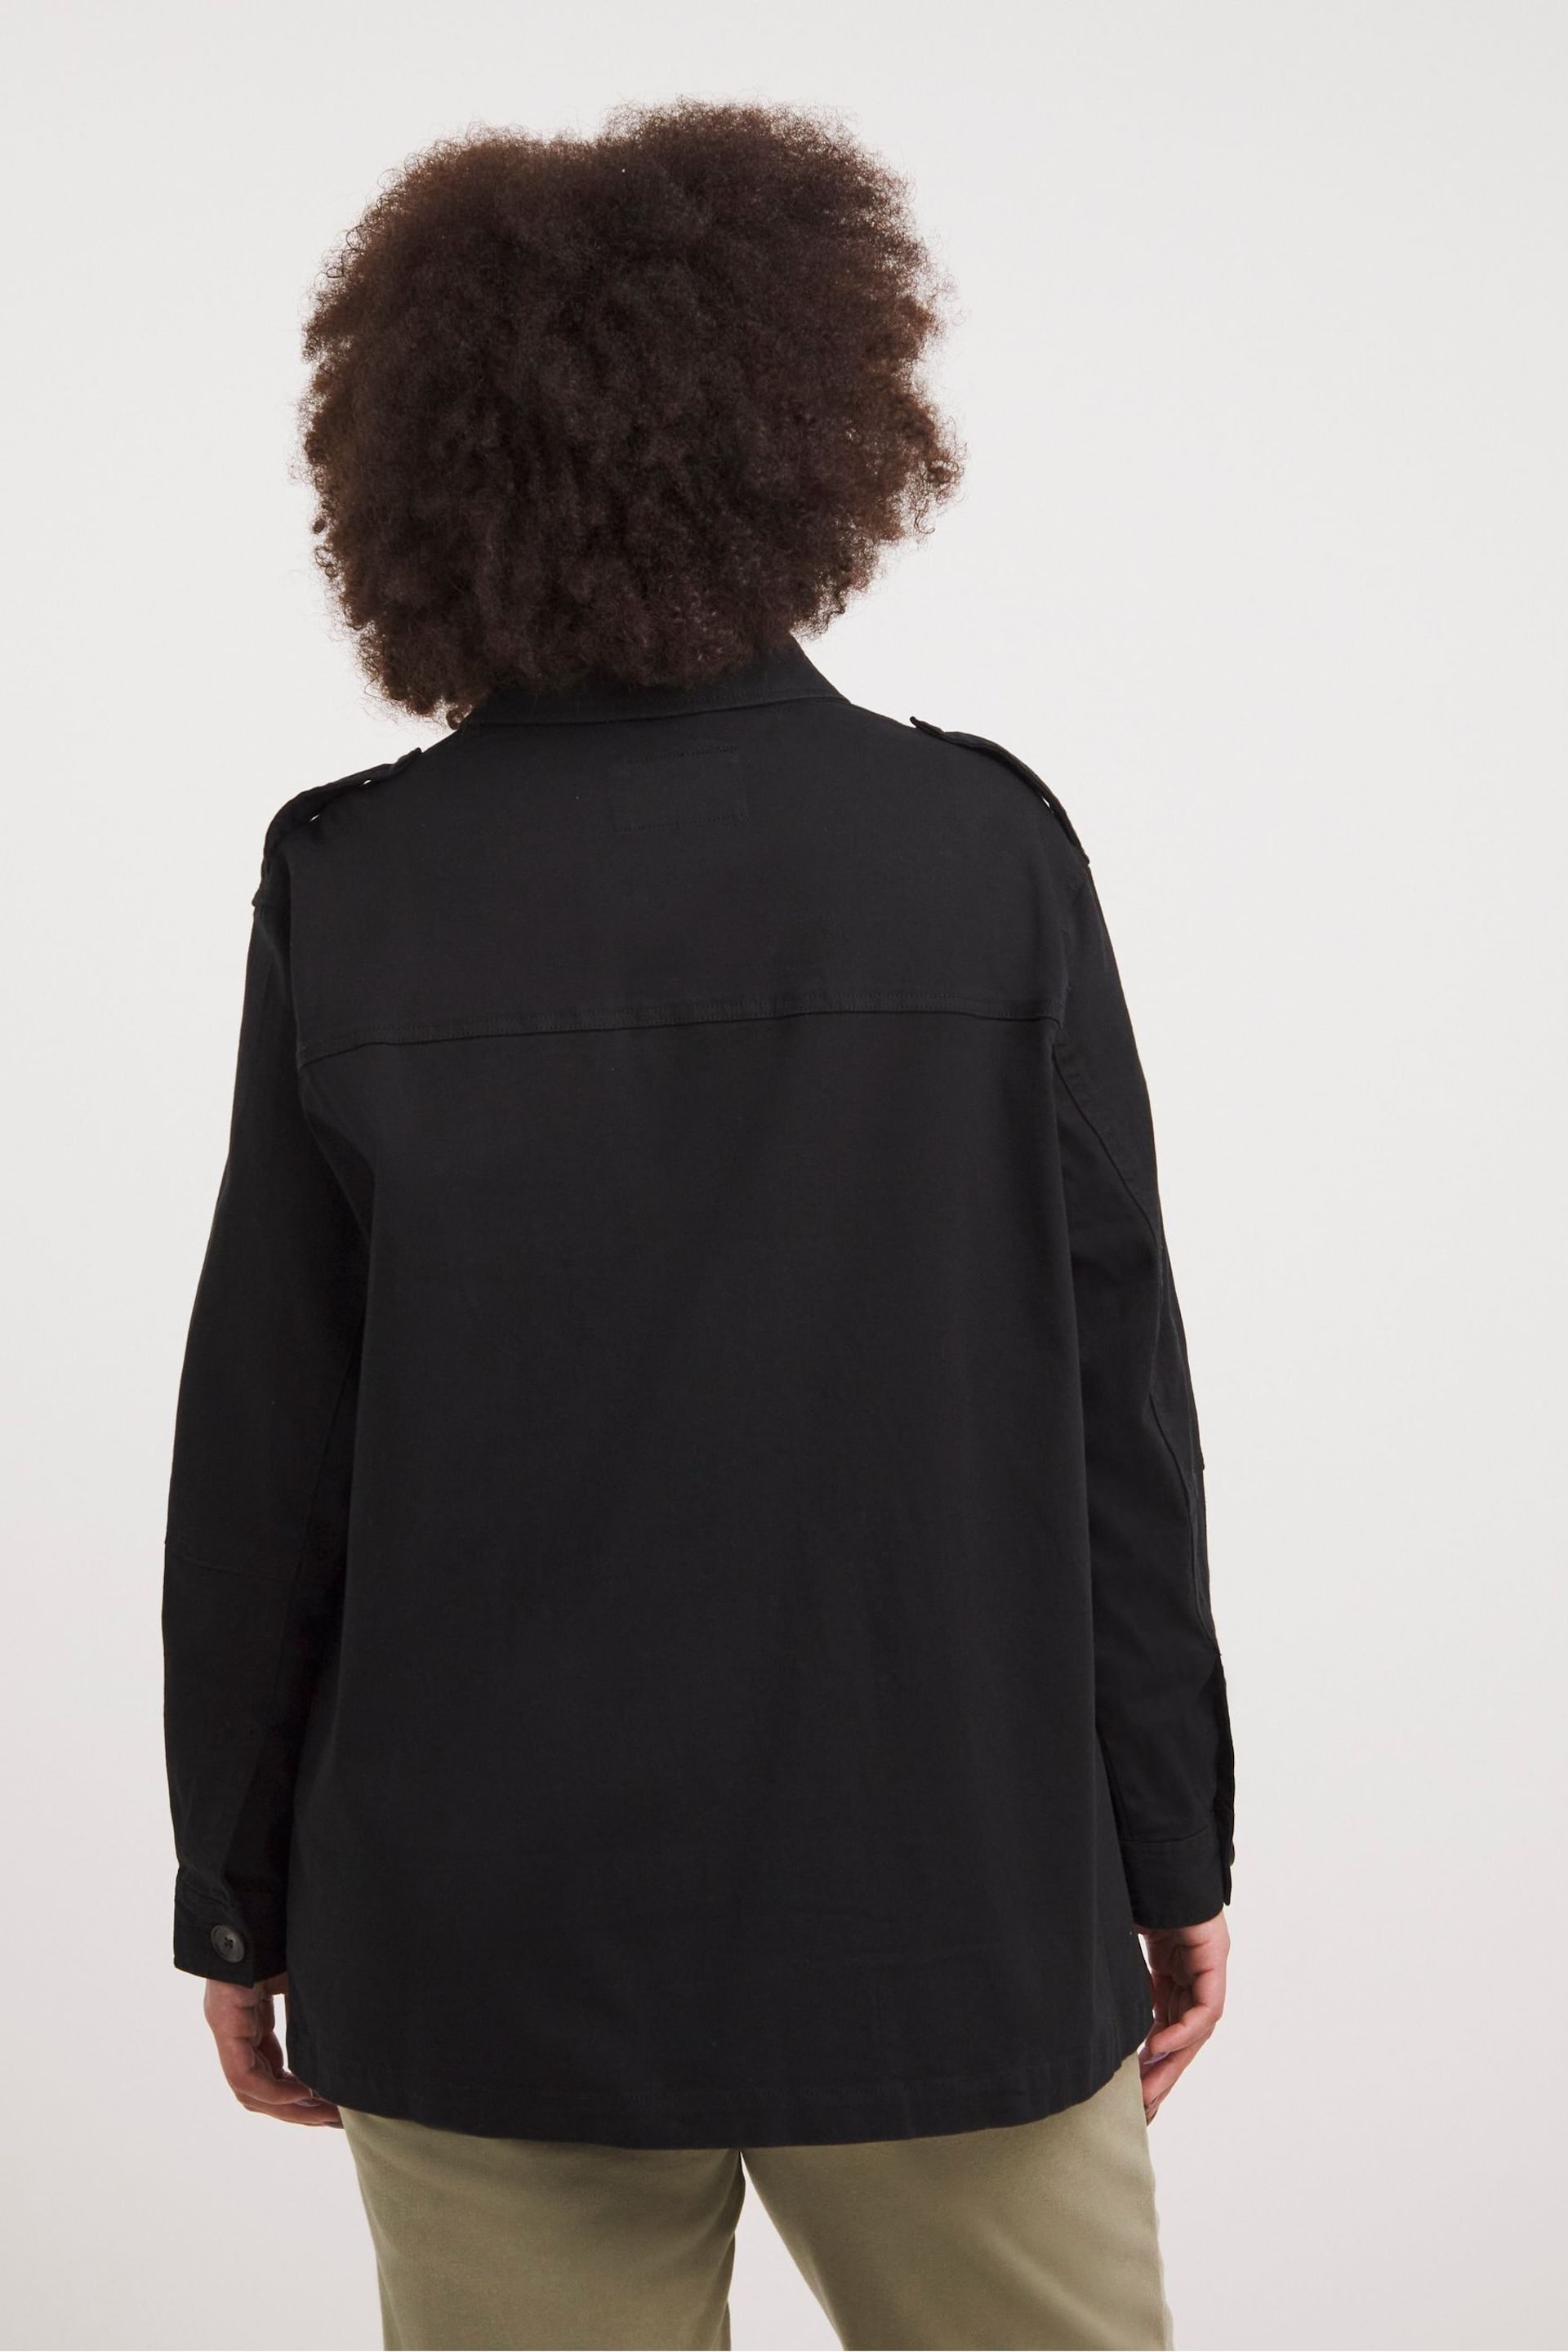 Simply Be Black Utility Jacket - Image 2 of 4